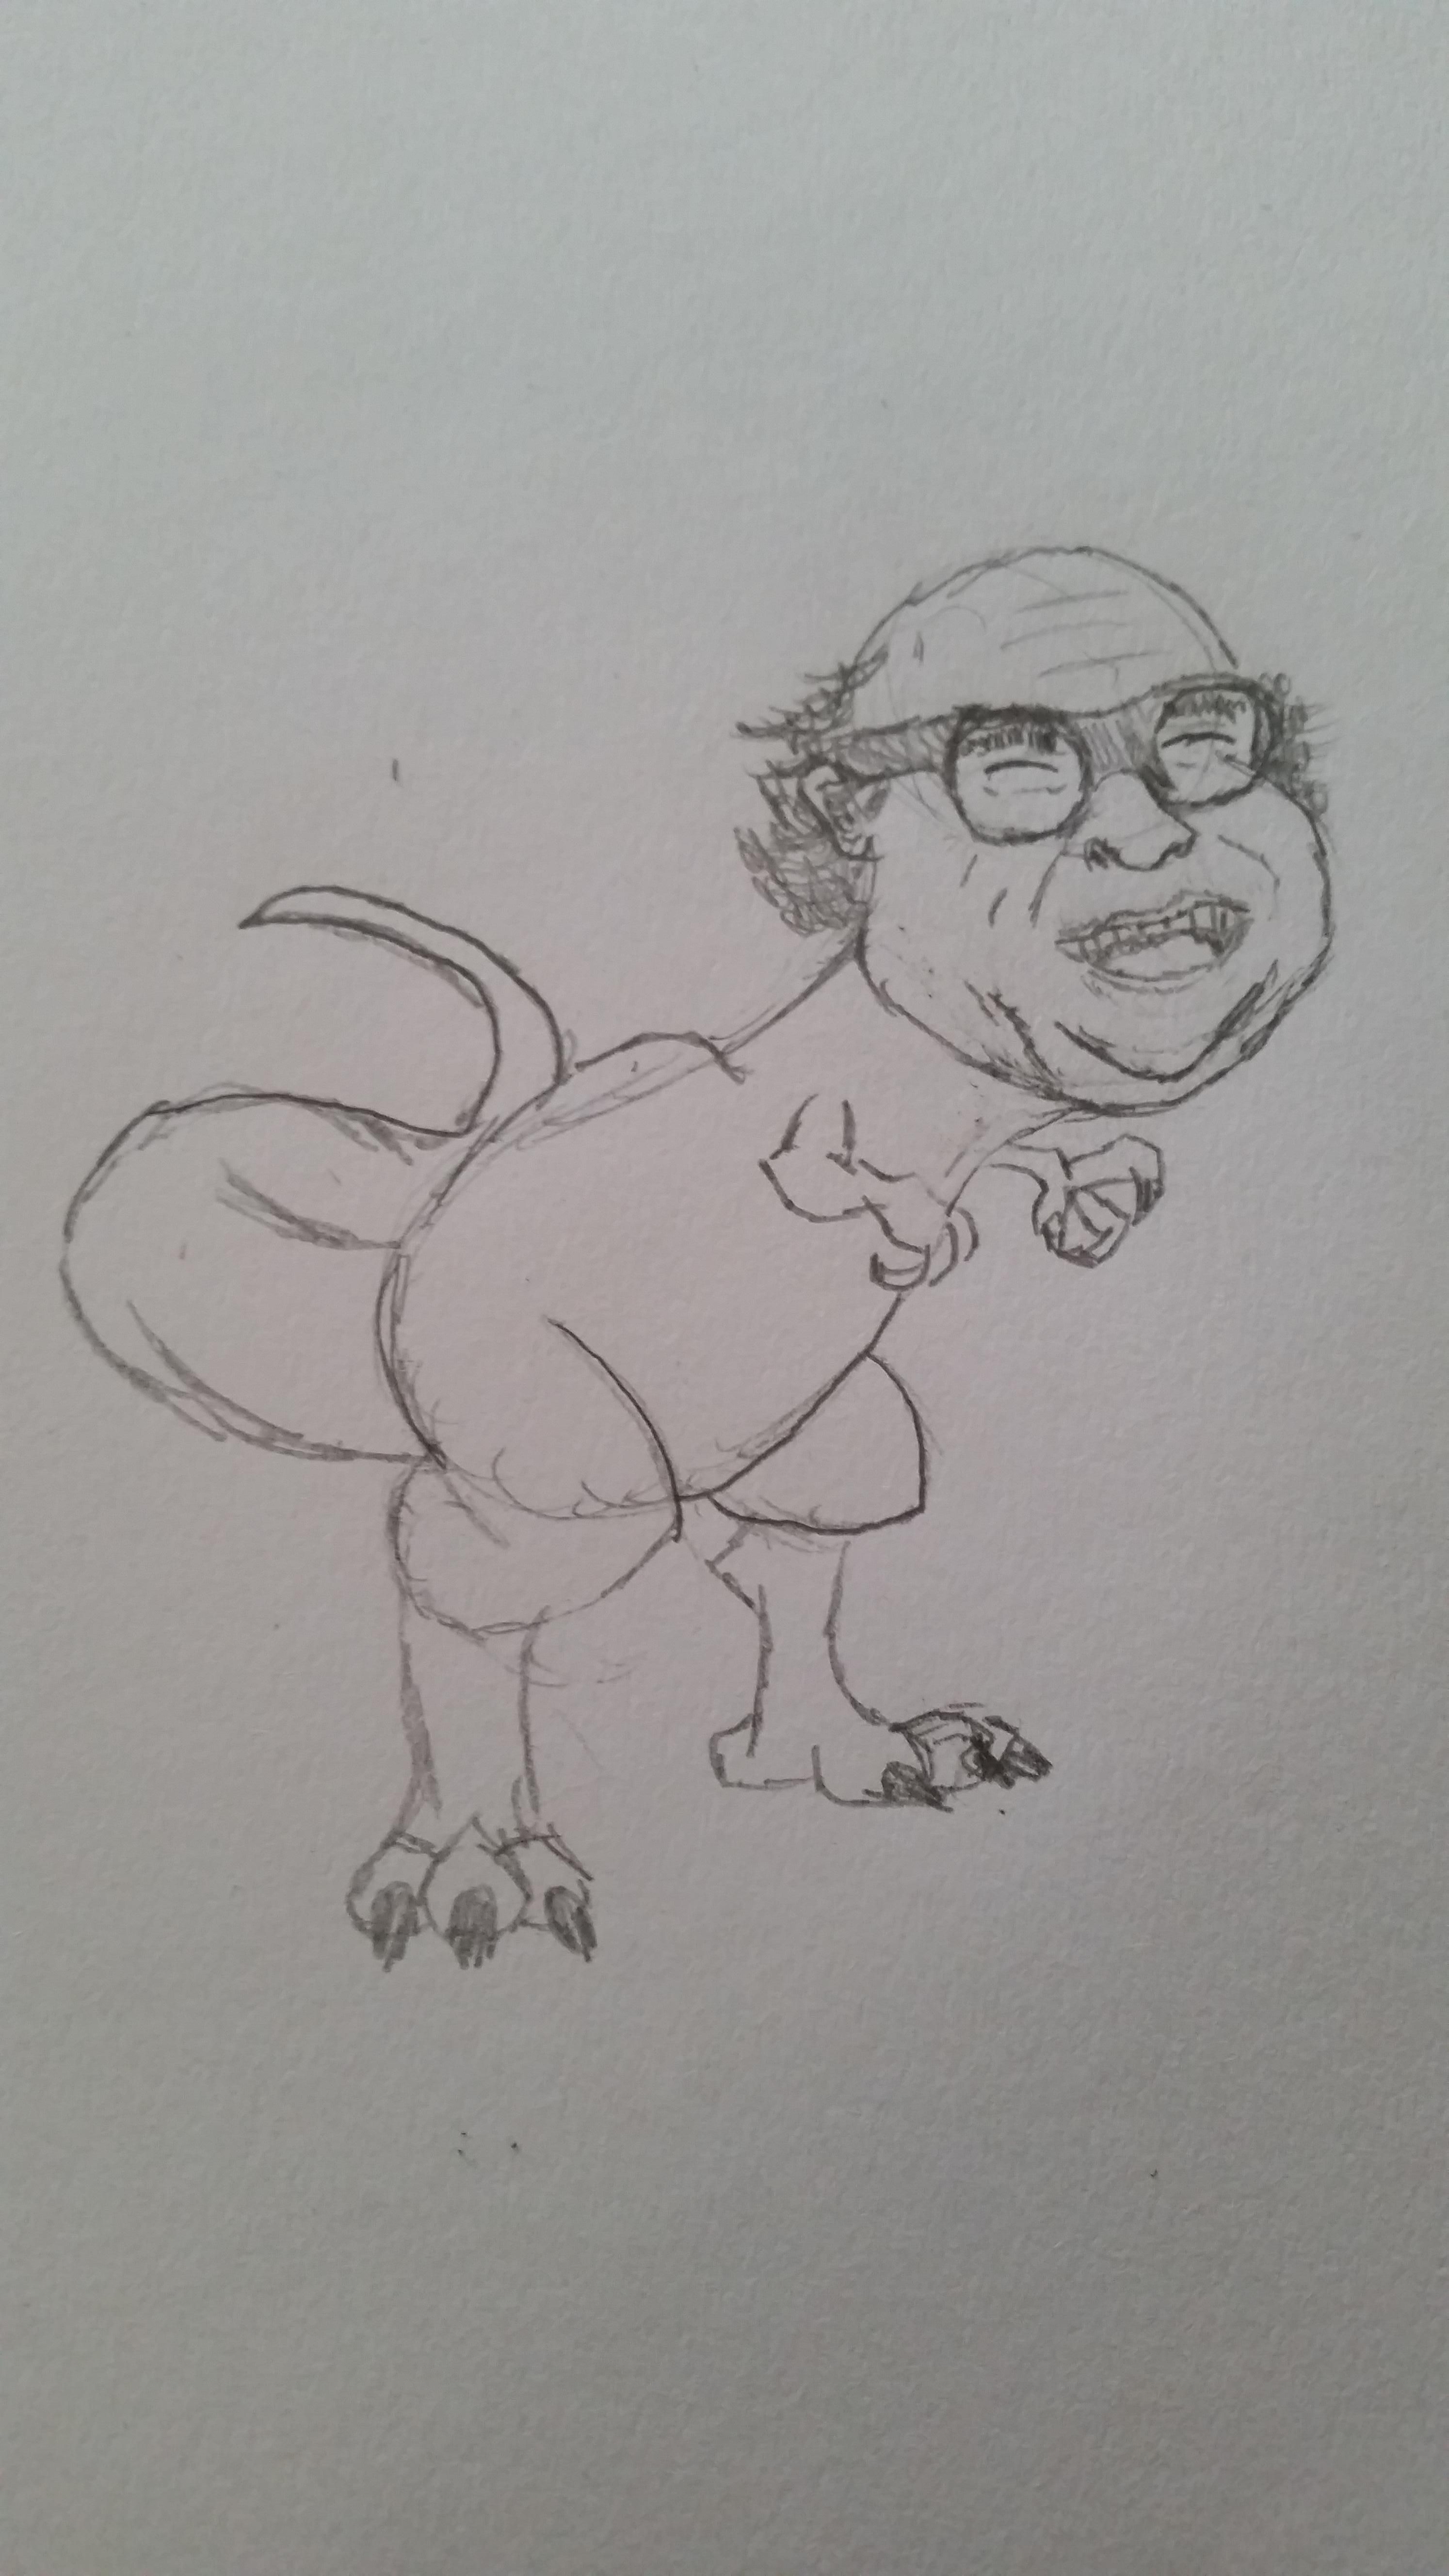 My brother jokingly told my son to draw Danny Devito's head on a dinosaur body...and he did!